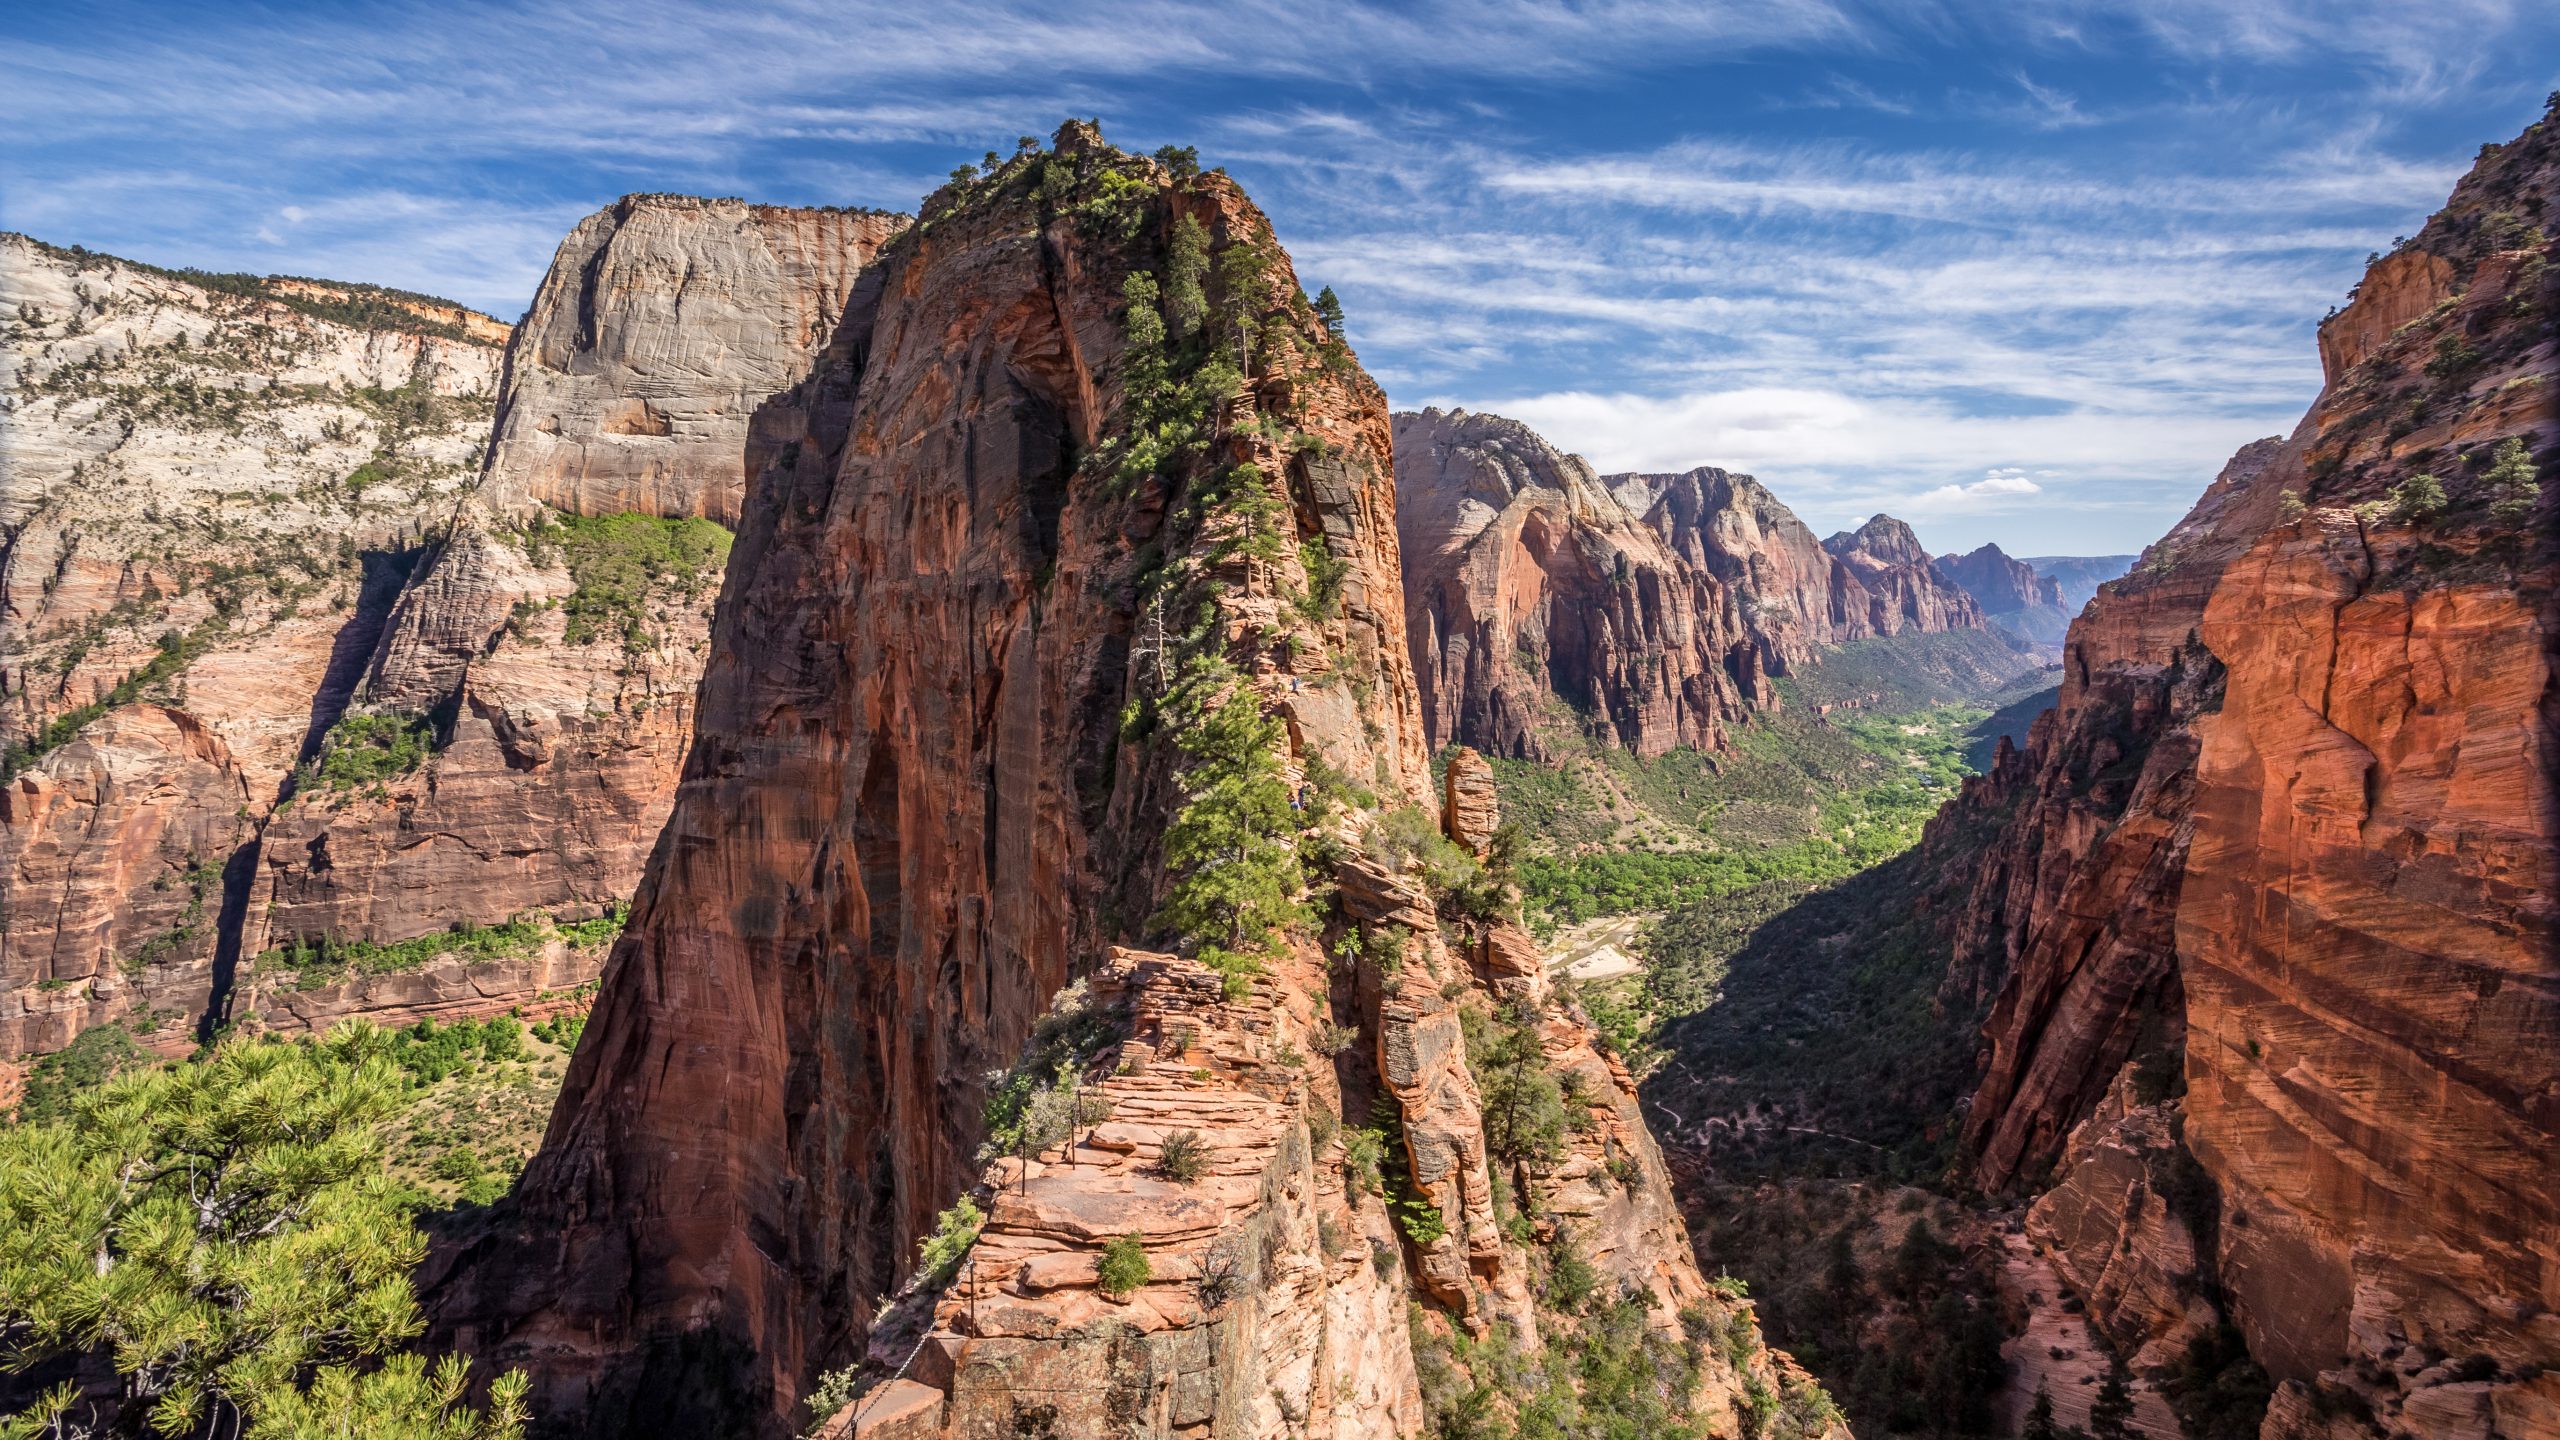 Spectacular hike to Angel's Landing in Zion national park, Utah